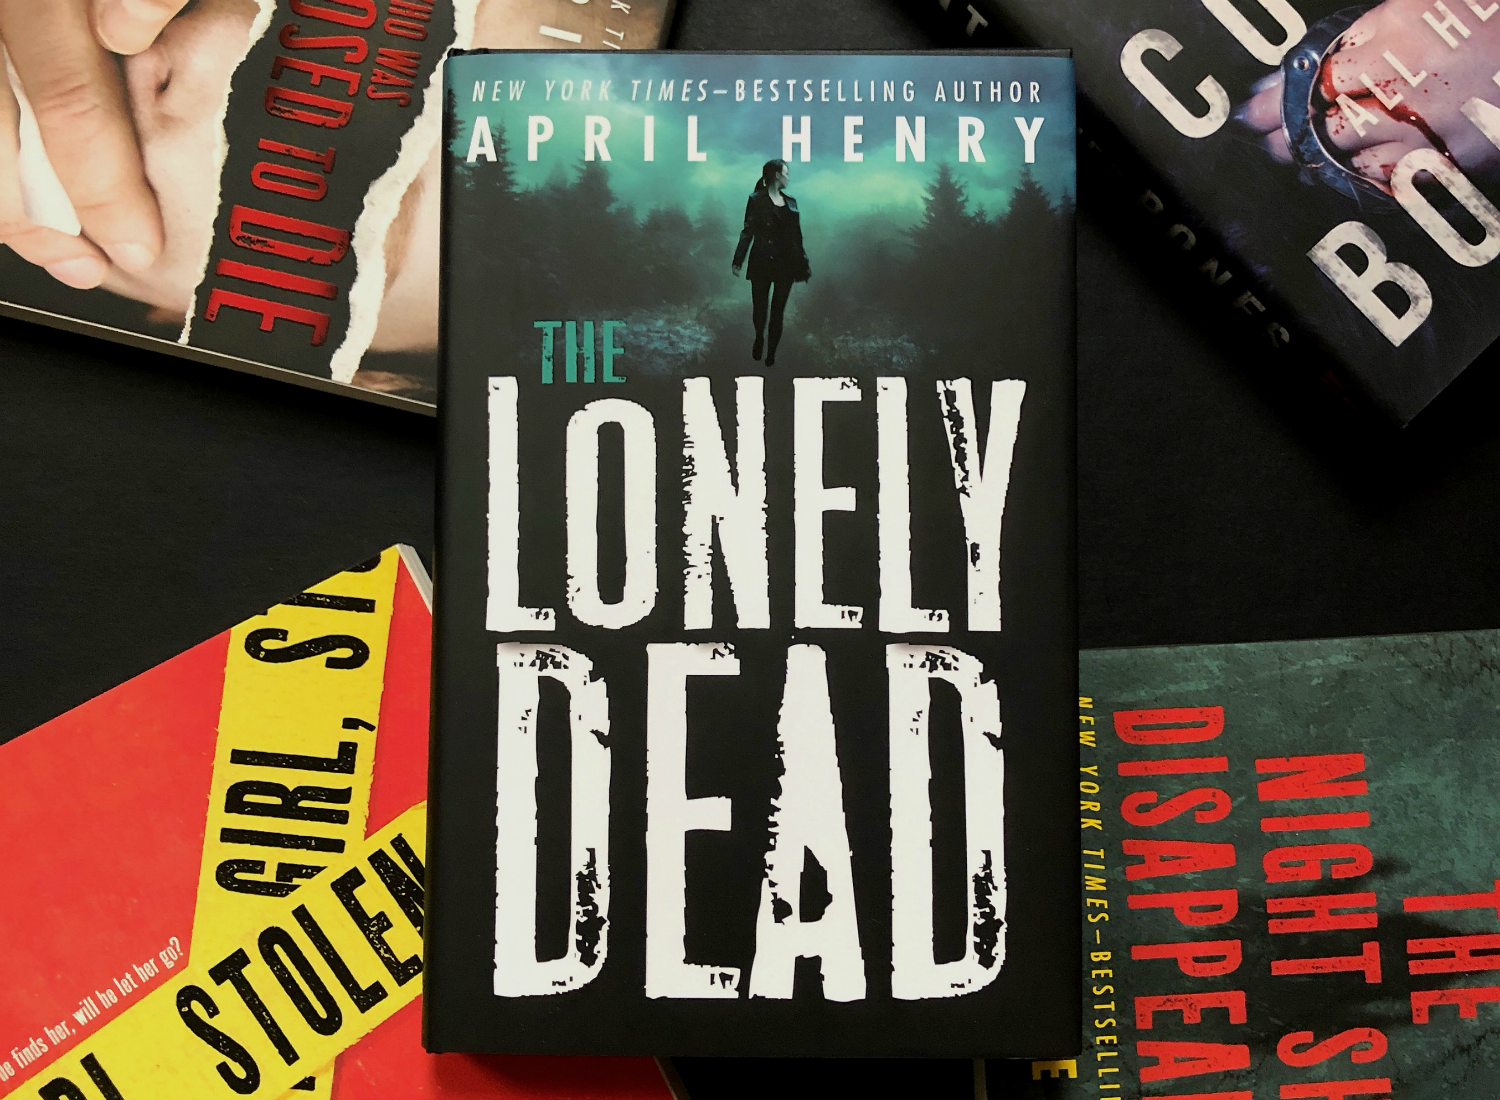 Find out more about THE LONELY DEAD from author April Henry!